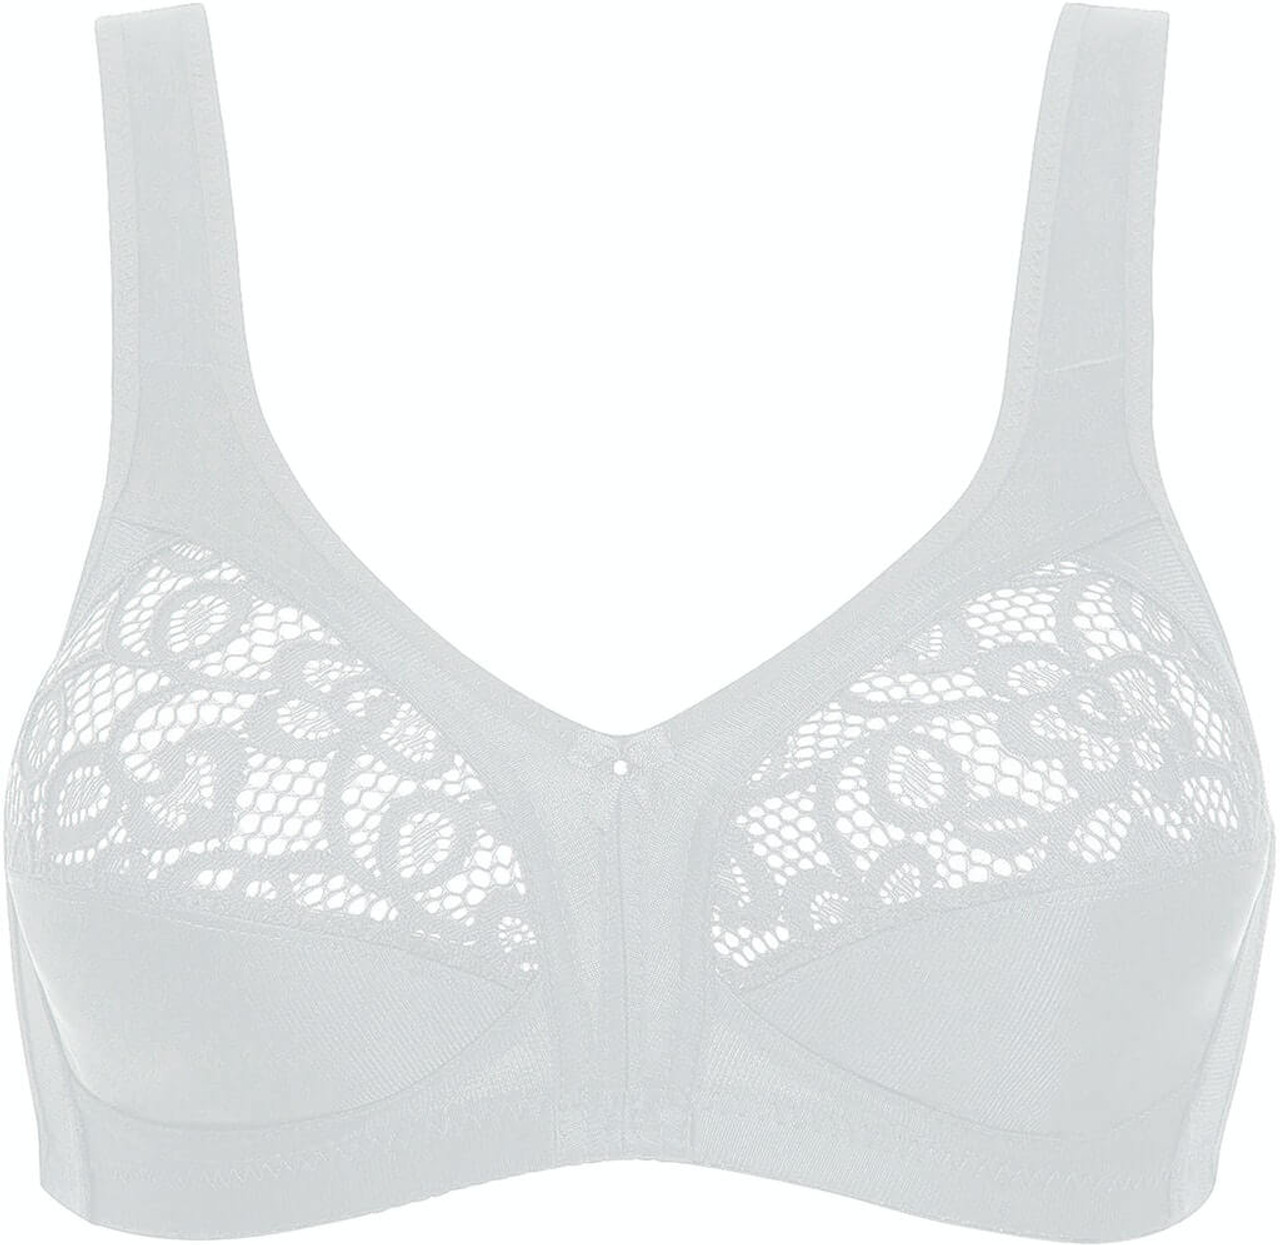 Naturana Wirefree Cotton Full Cup Bra with Lace inserts and side